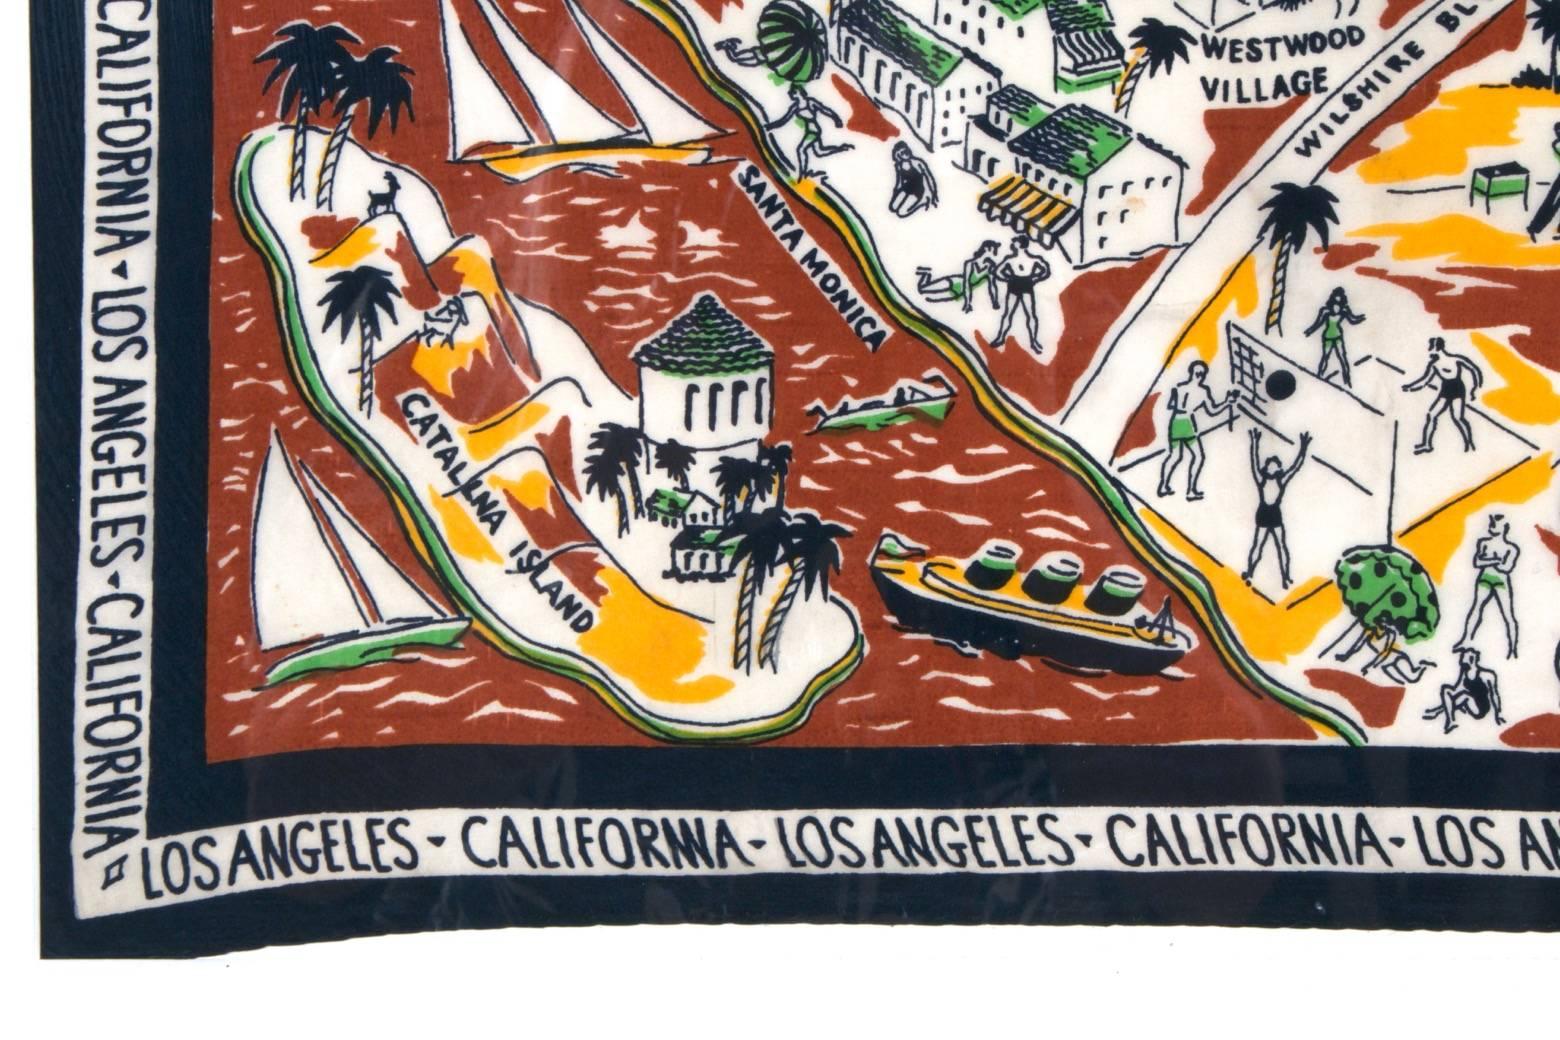 American Los Angeles Area, Southern California Pictorial Tourist Scarf, circa 1930s